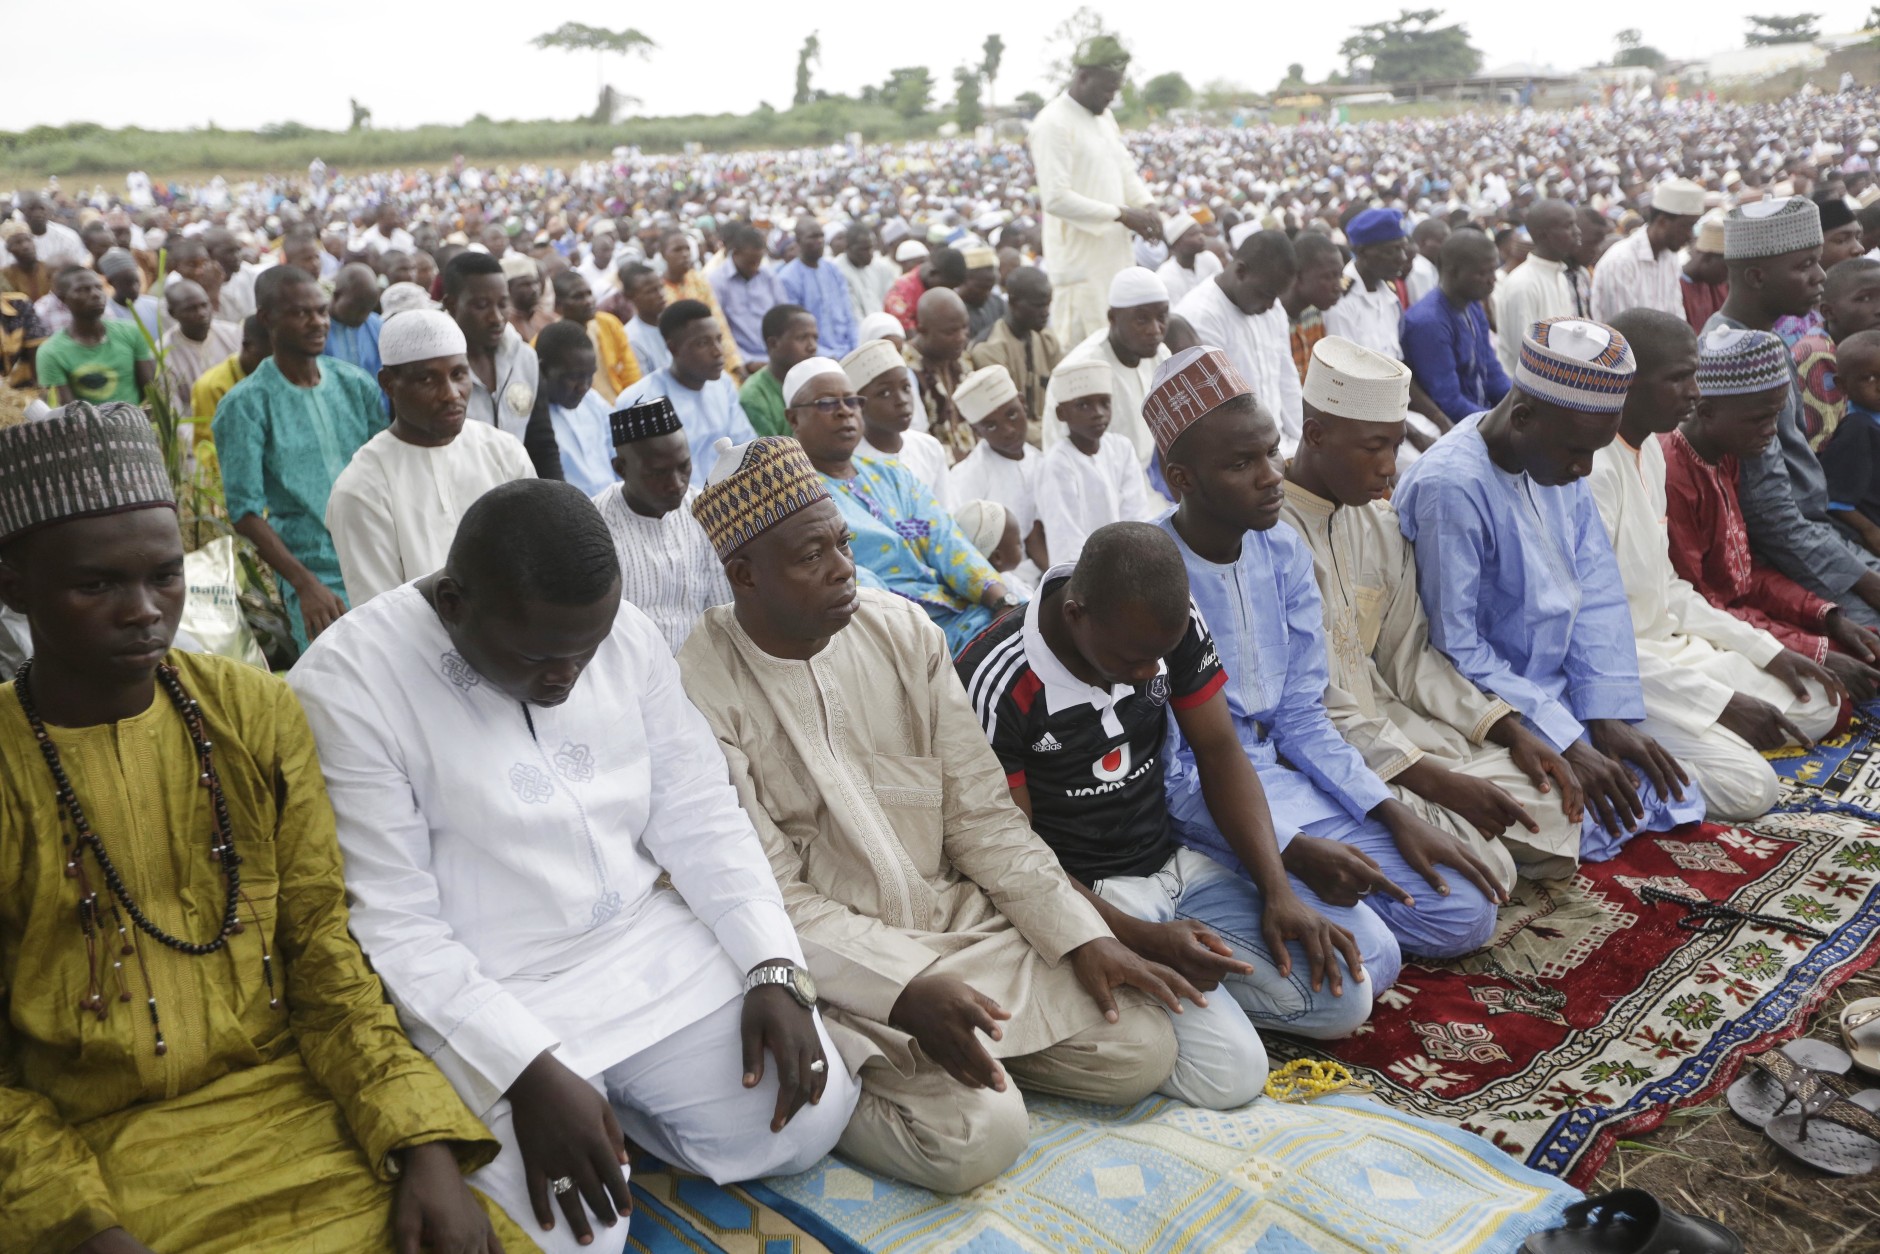 Nigeria Muslims attend the Eid al-Fitr prayers as Muslims around the world celebrate the end of the holy month of Ramadan, in Lagos, Nigeria, Wednesday, July 6, 2016 (AP Photo/Sunday Alamba)